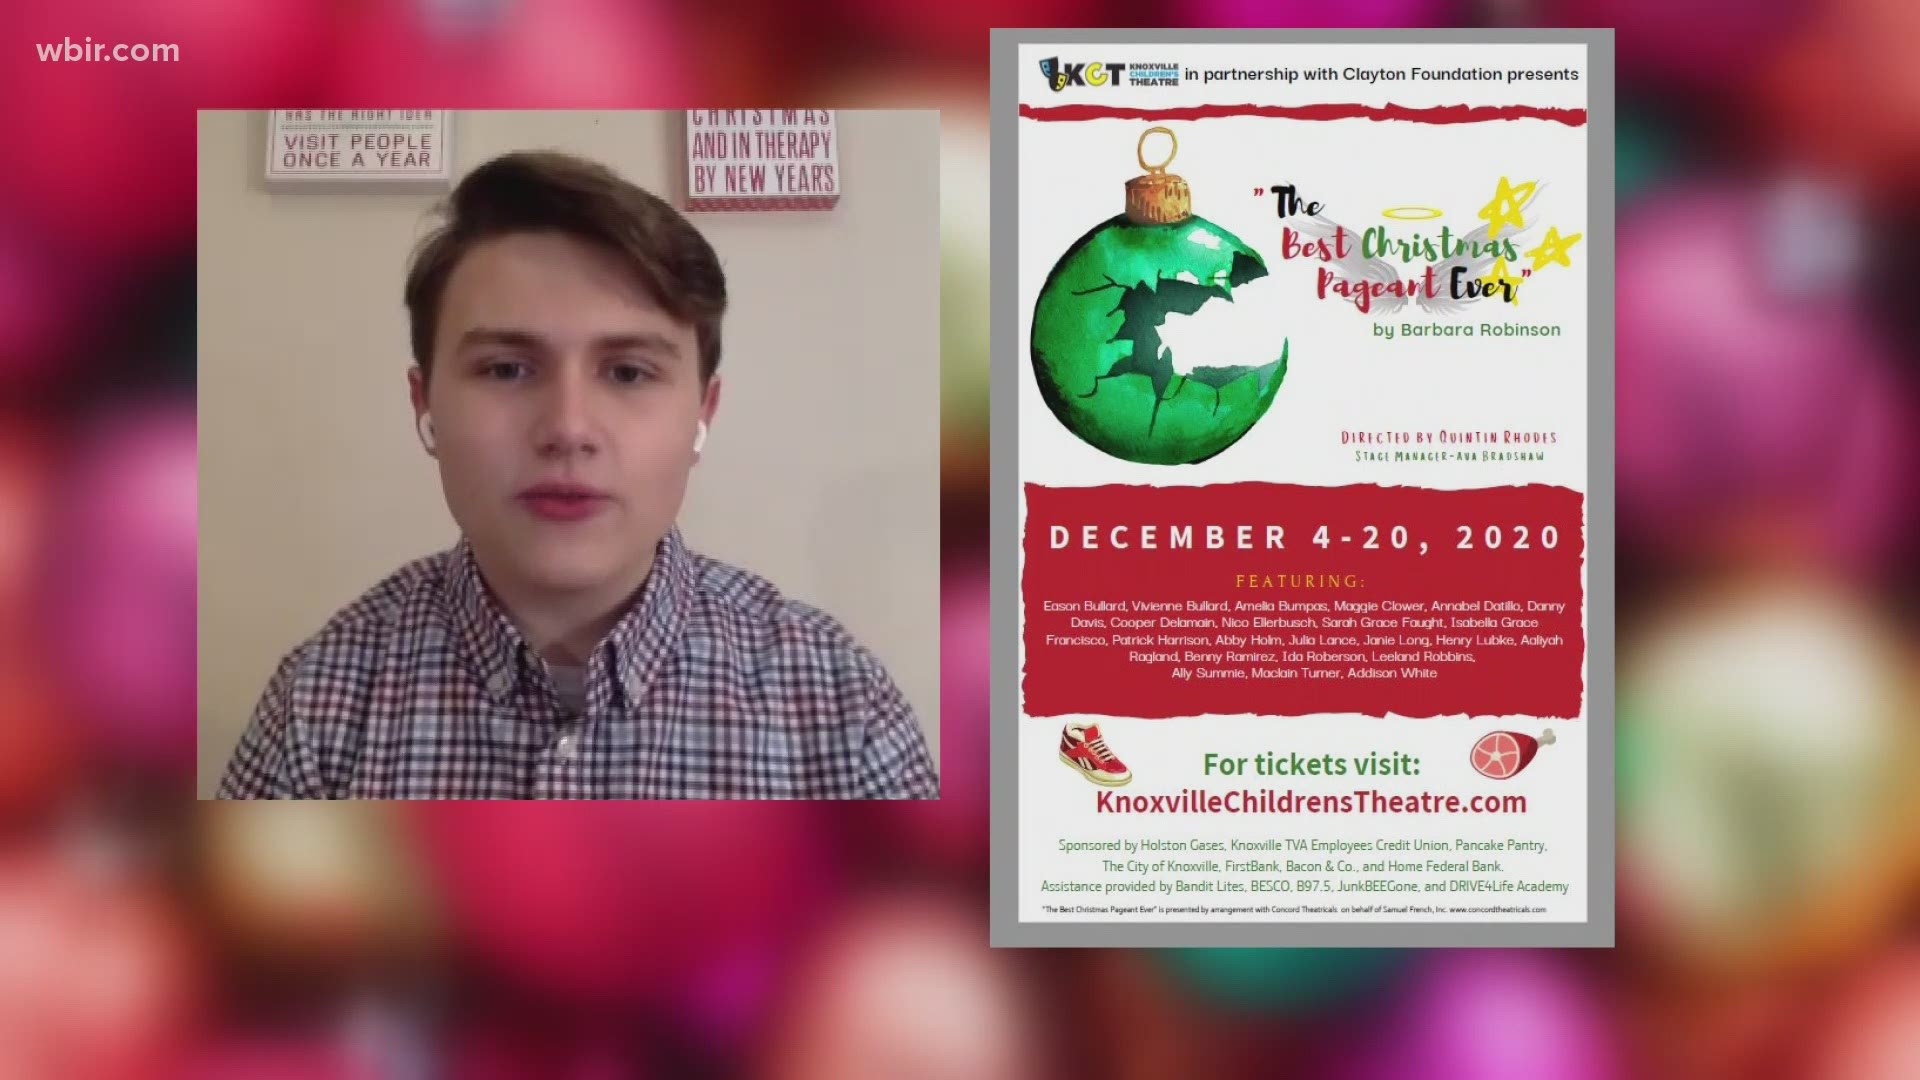 Knoxville Children's Theatre will perform The Best Christmas Pageant Ever on weekends from December 4 to 20